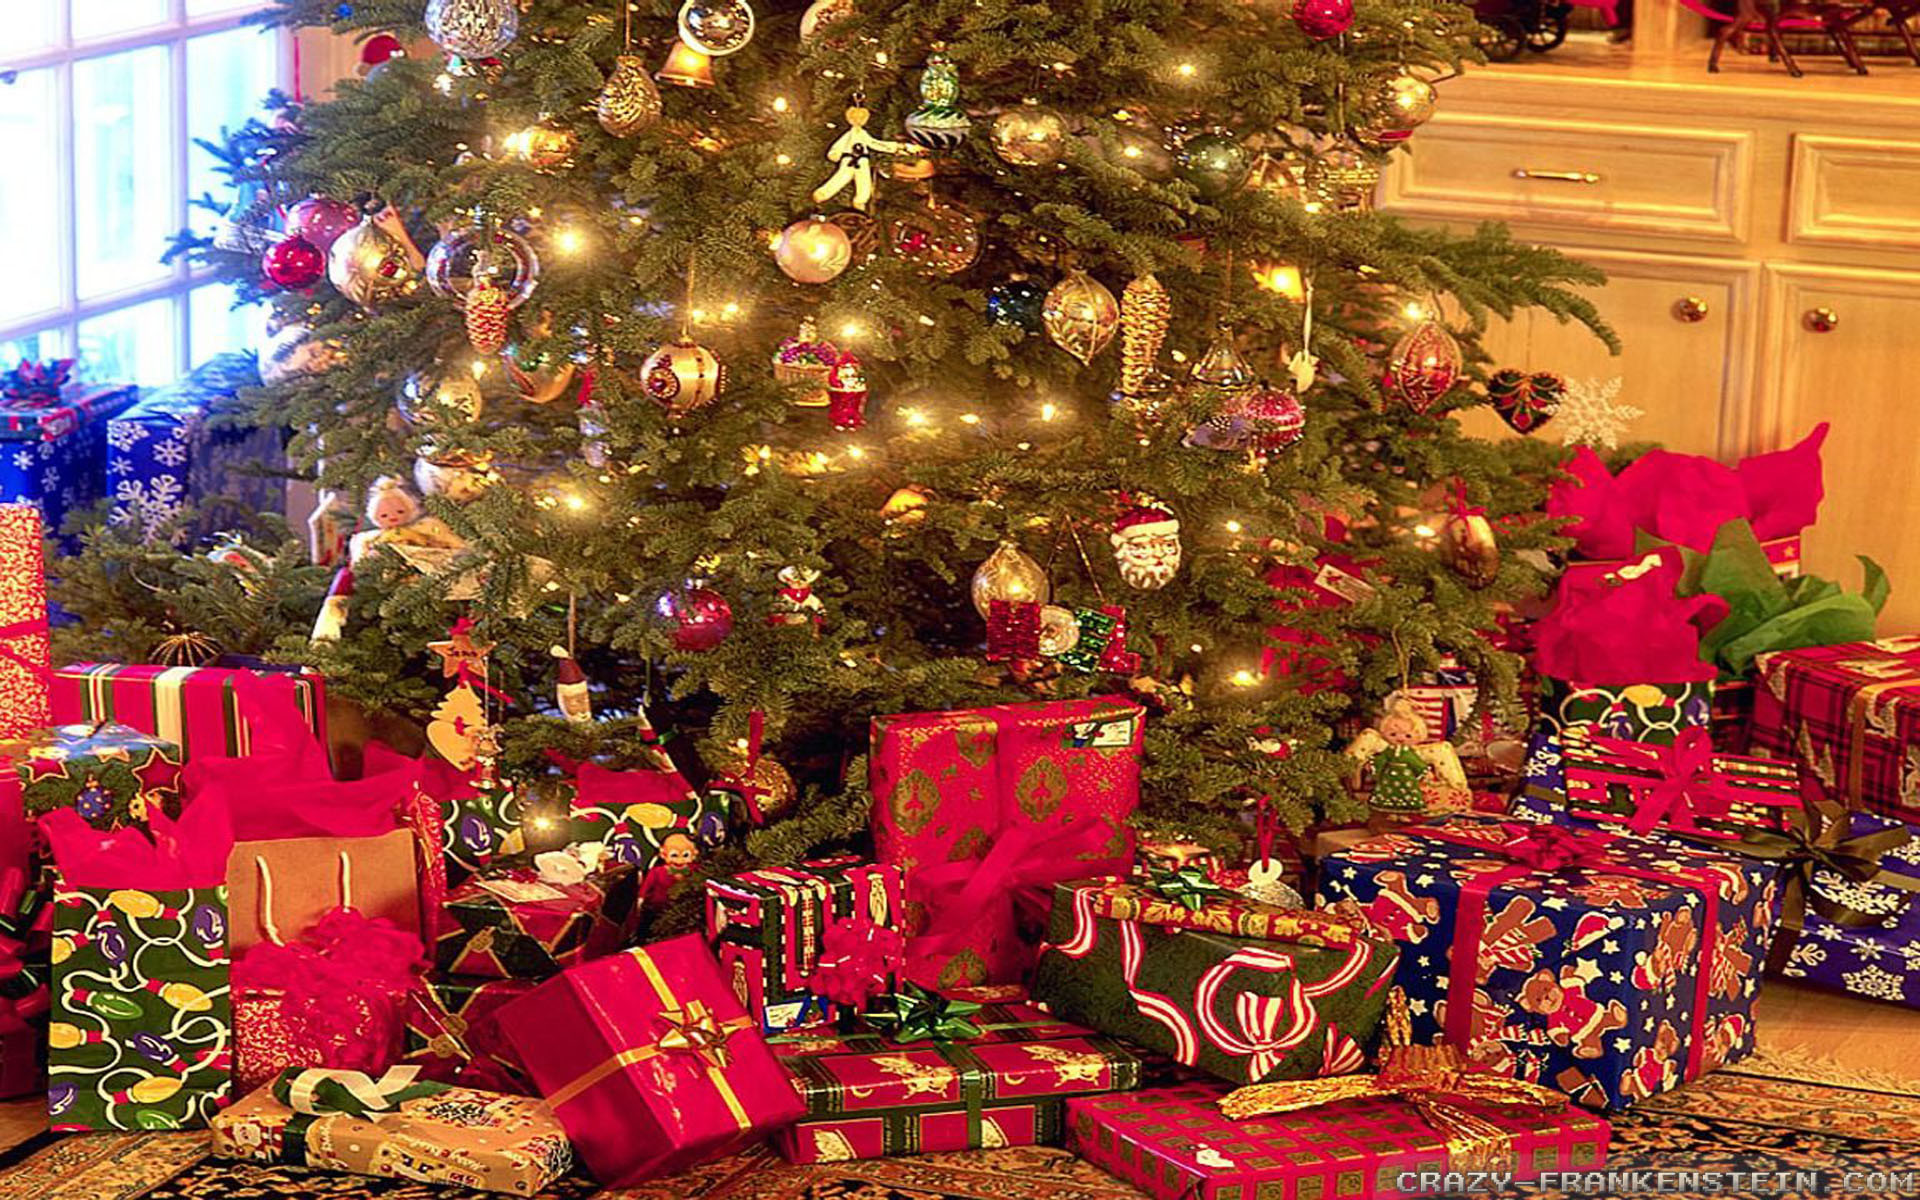 1920x1200 Wallpaper: Big tree Christmas gifts wallpapers. Resolution: 1024x768 |  1280x1024 | 1600x1200. Widescreen Res: 1440x900 | 1680x1050 | 